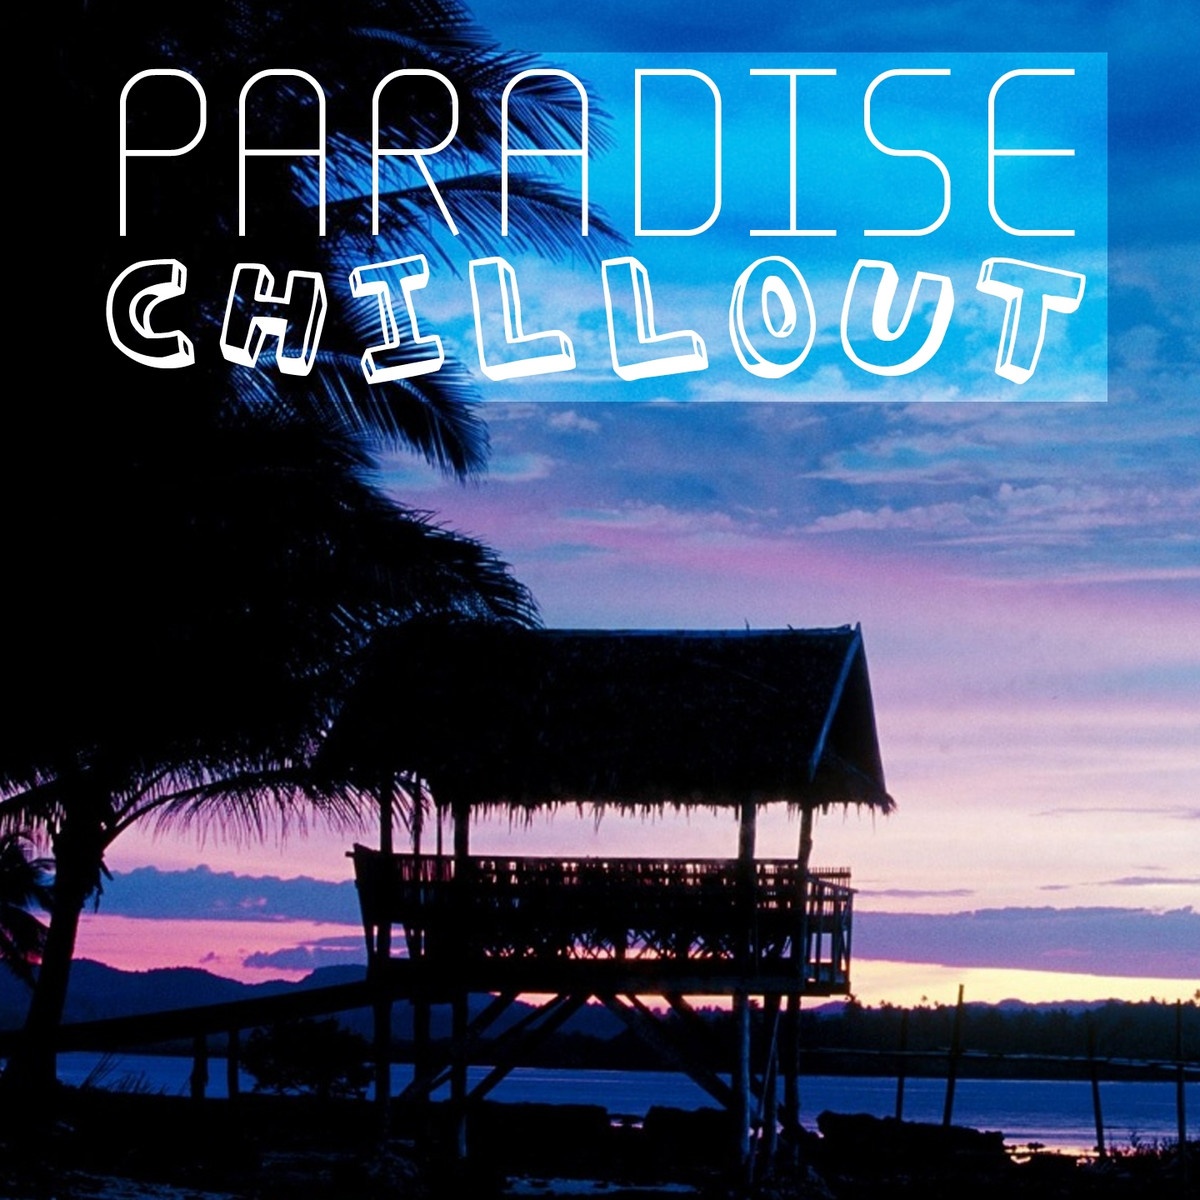 Paradise Chill Out 2011